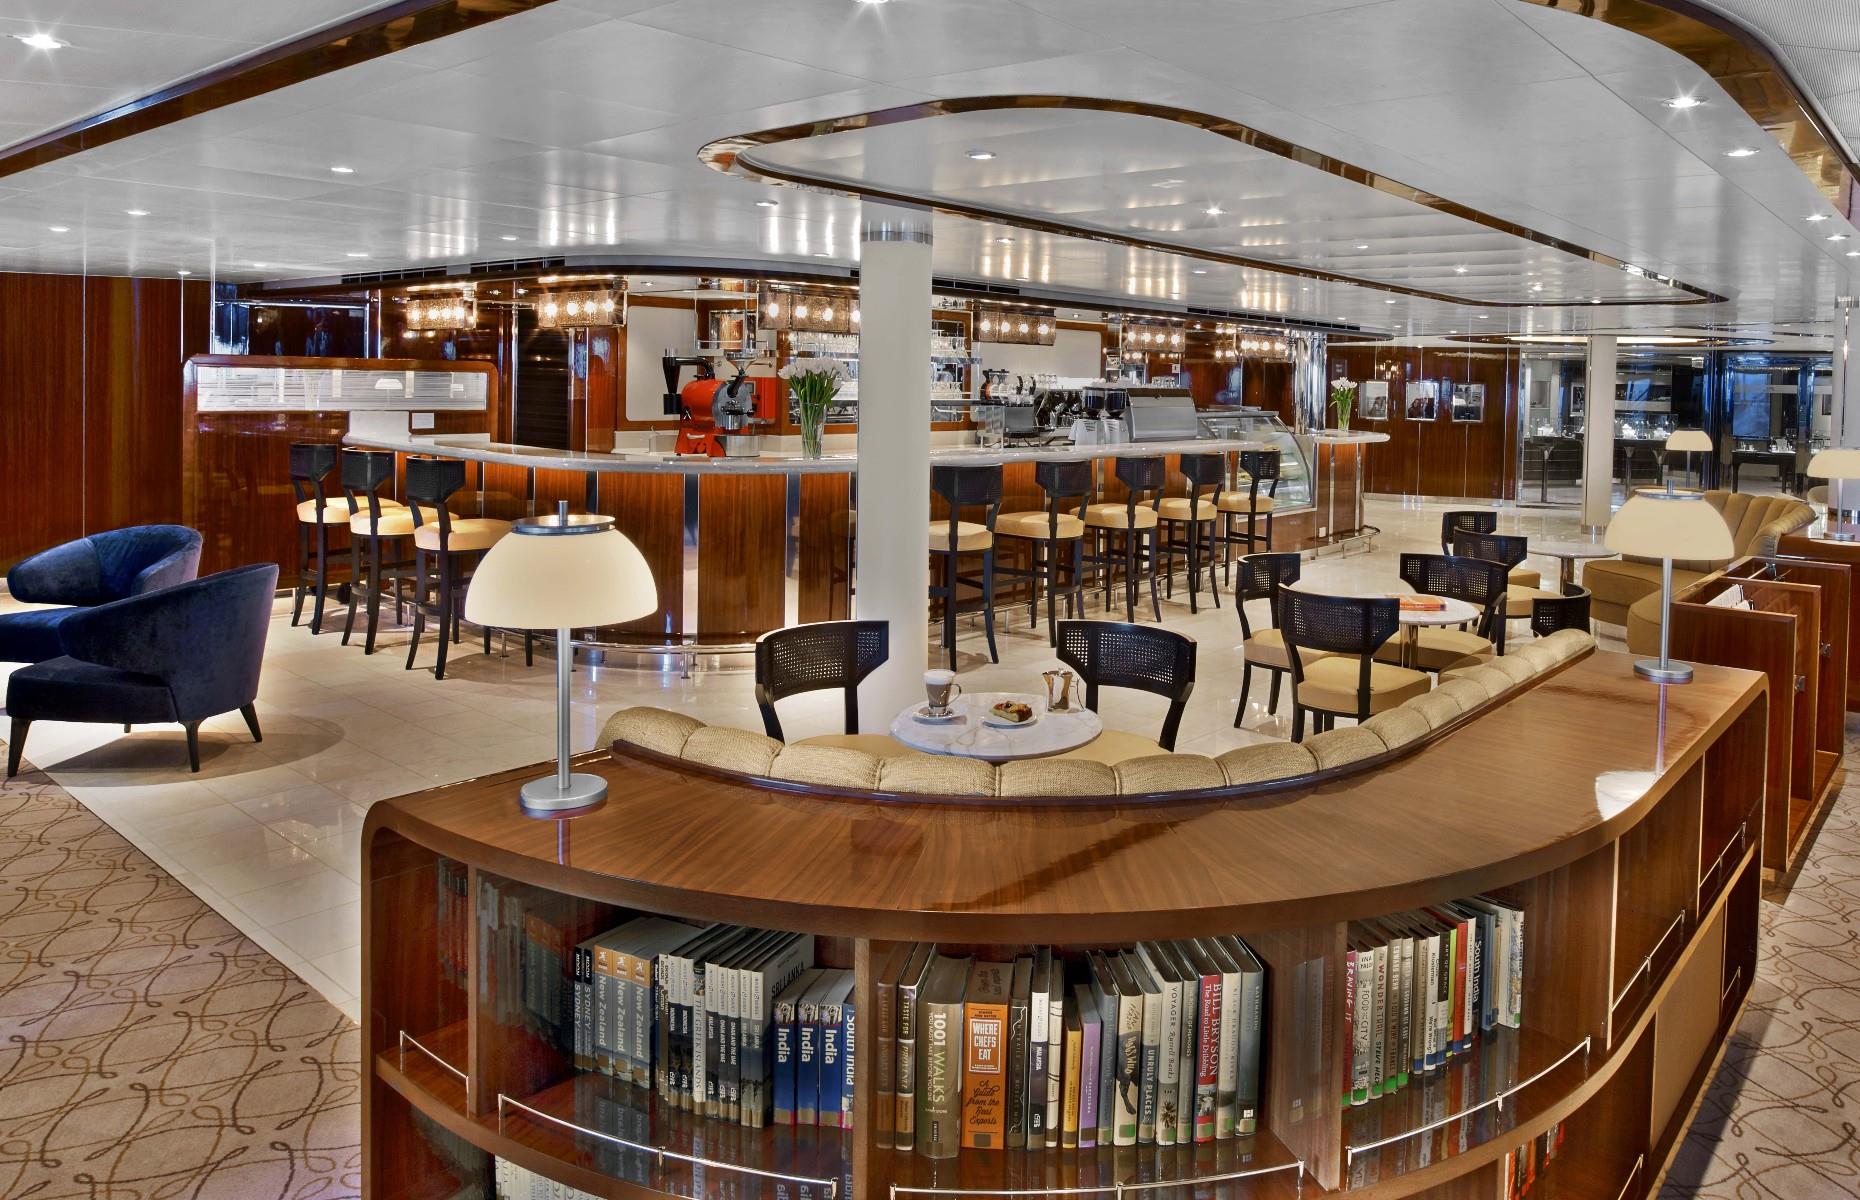 <p>Seabourn Square, designed to be an innovative concierge lounge, invites guests to access every shipboard service in a relaxed, living-room atmosphere. The Square's thoughtful layout includes a library, upscale shops, an outdoor terrace and a coffee bar, all arranged across a light-filled space with dark-wood accents, a subtle color palette and striking blue velvet armchairs.</p>